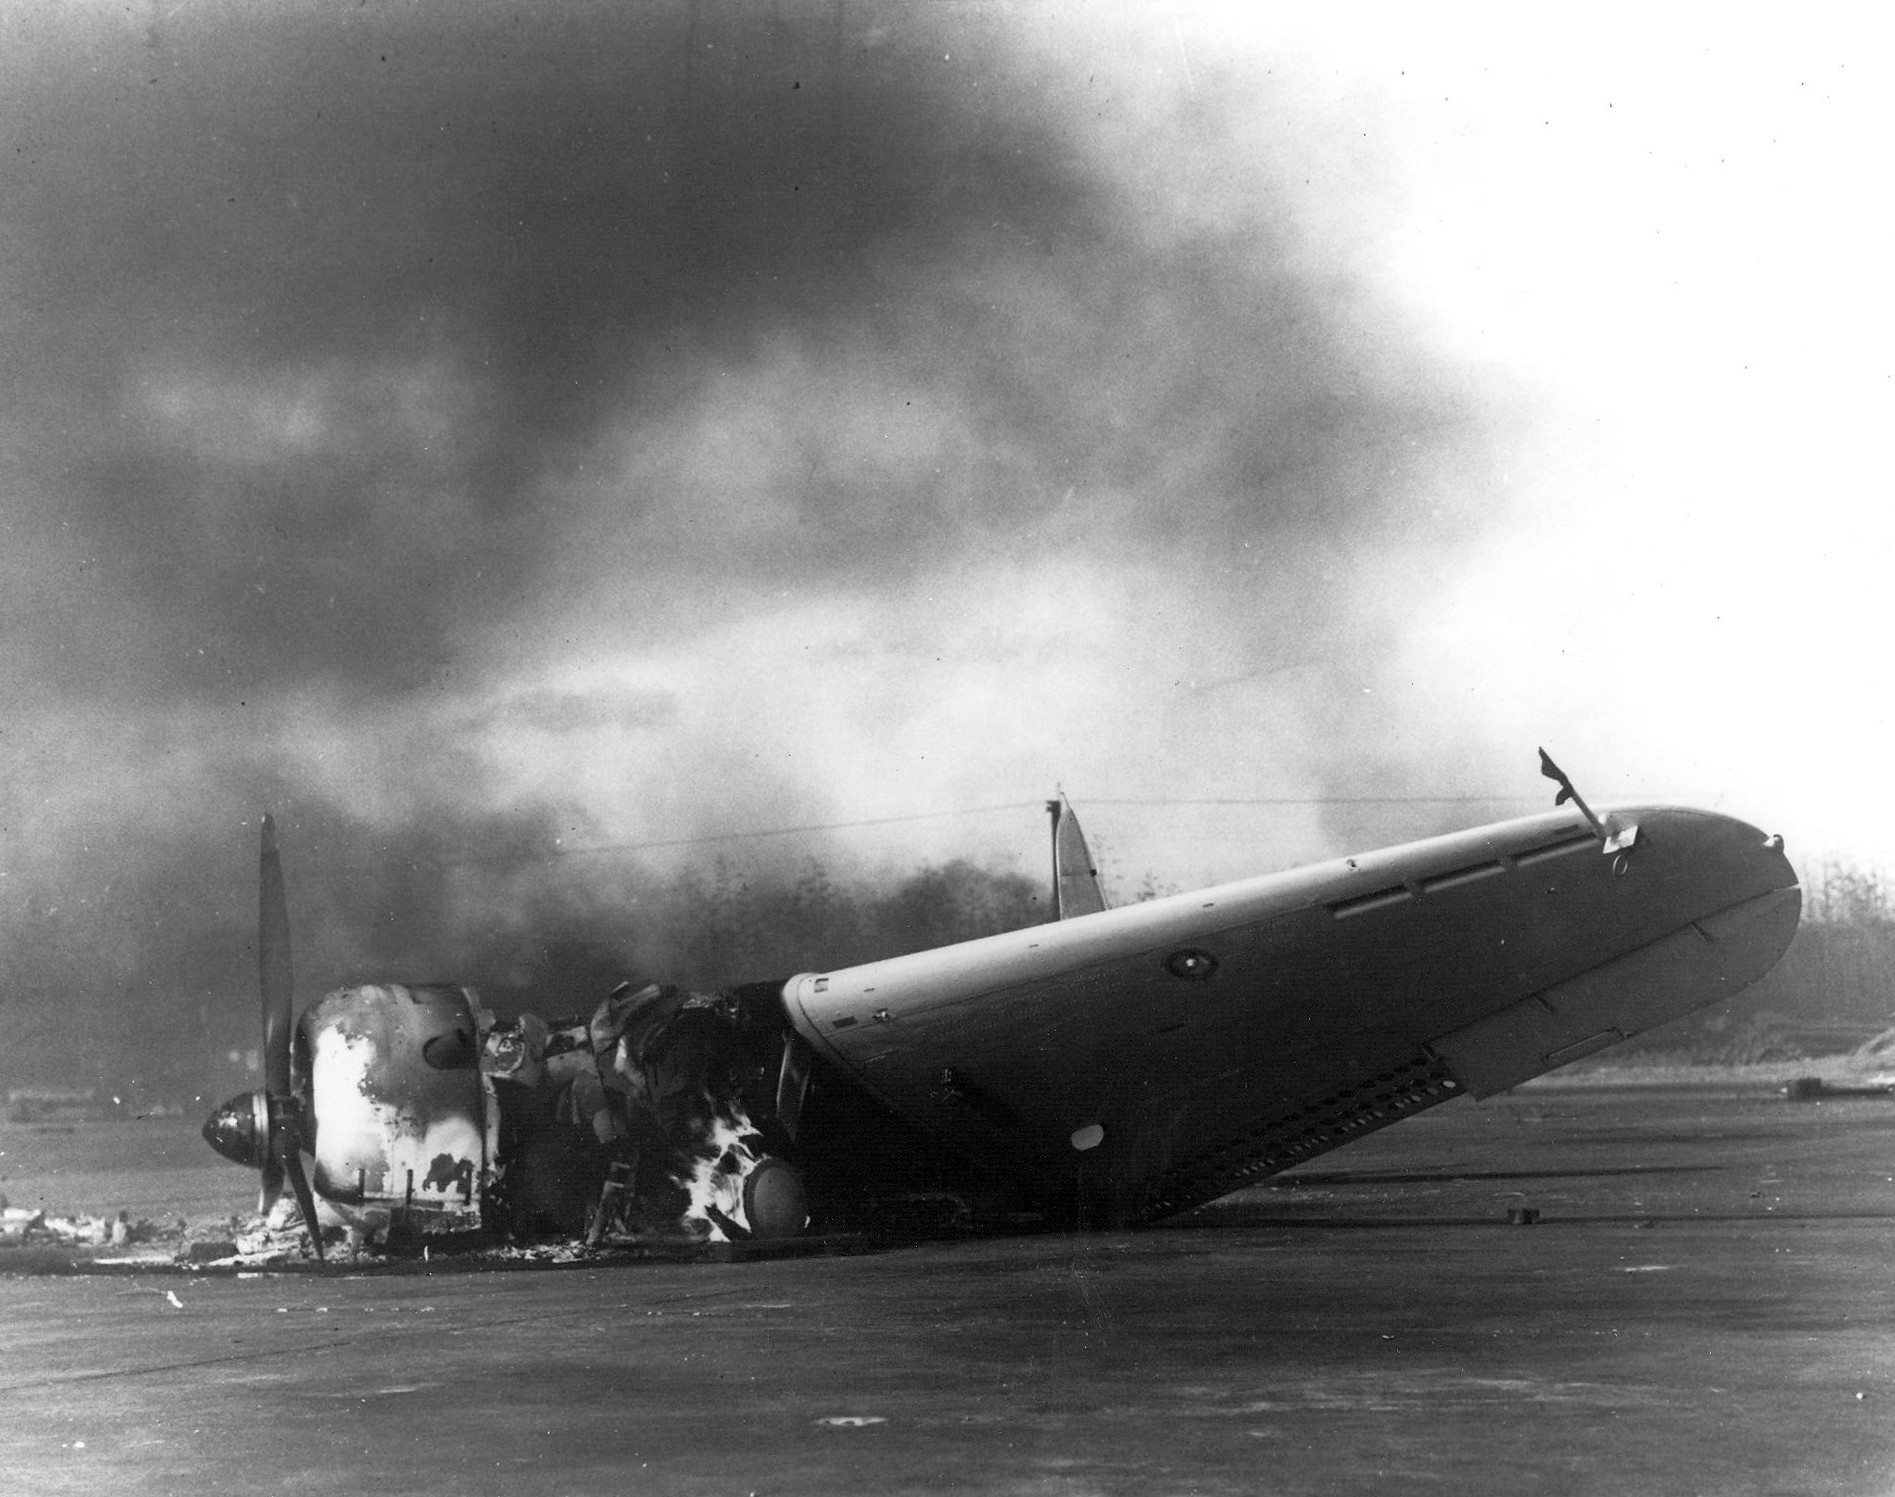 The remains of a Douglas SBD Dauntless dive-bomber burns on Ewa's ramp on Dec. 7, 1941.